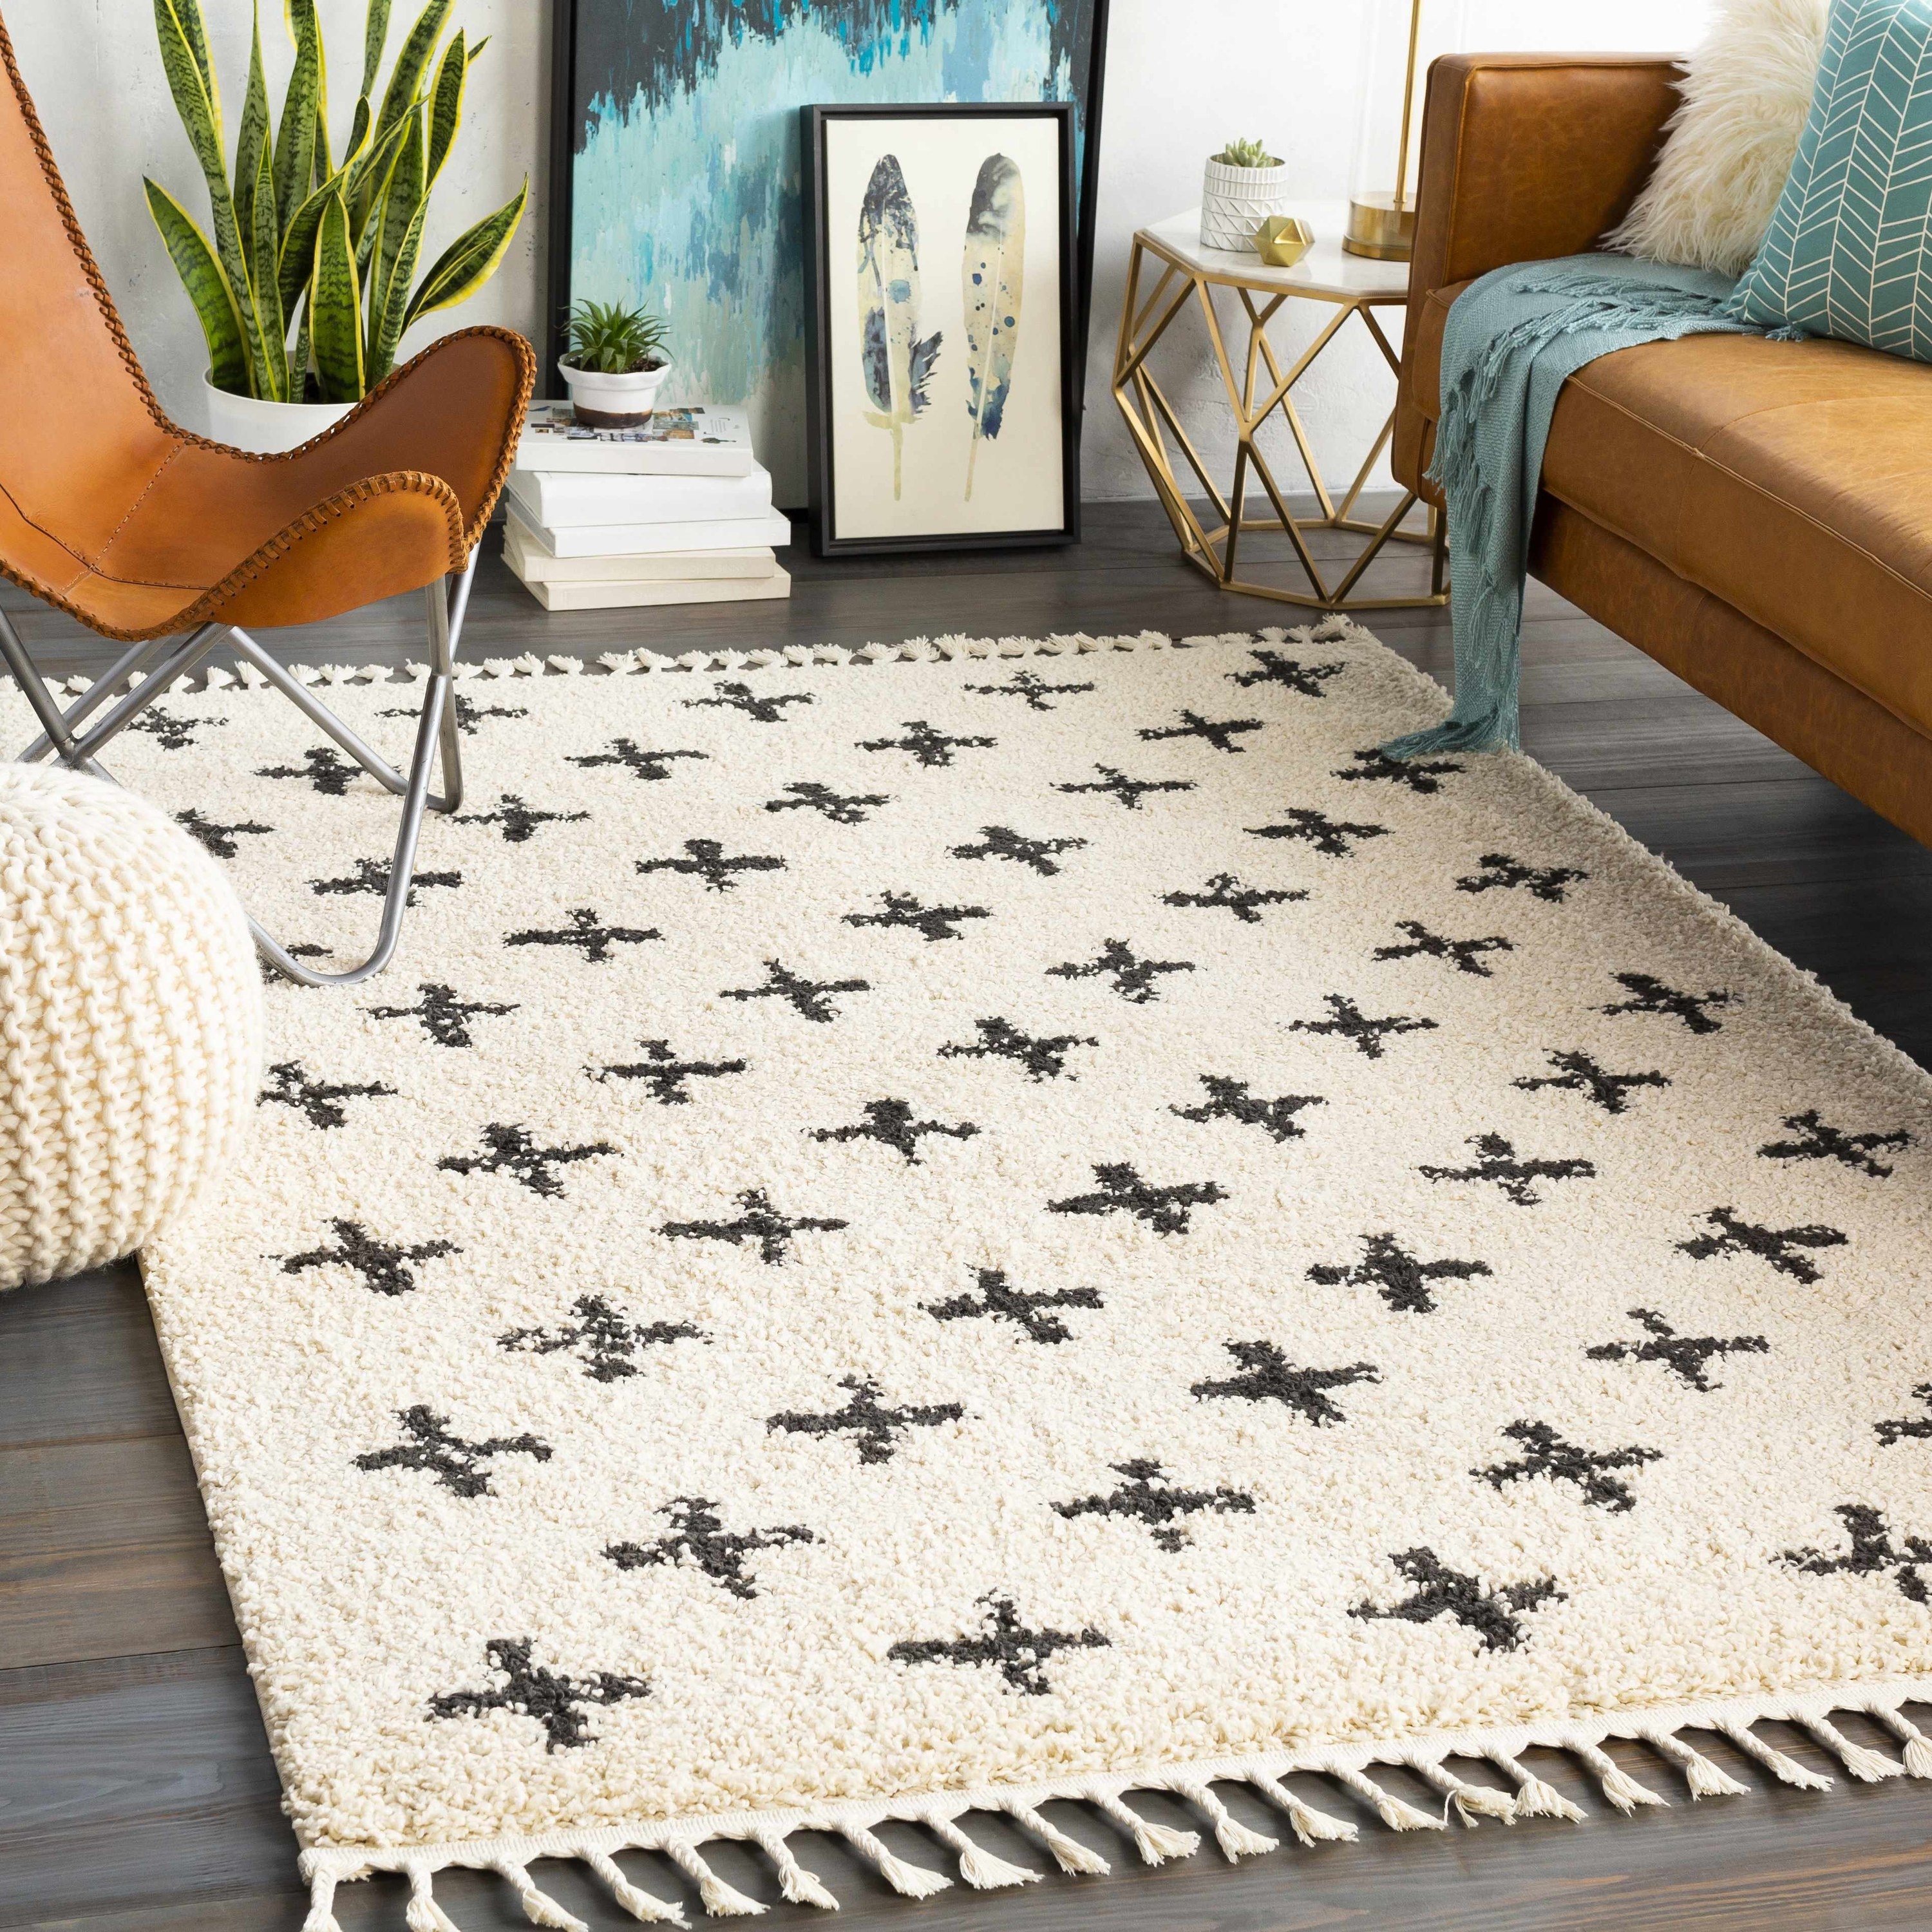 an off white rug with black cross designs through it and fringed edges